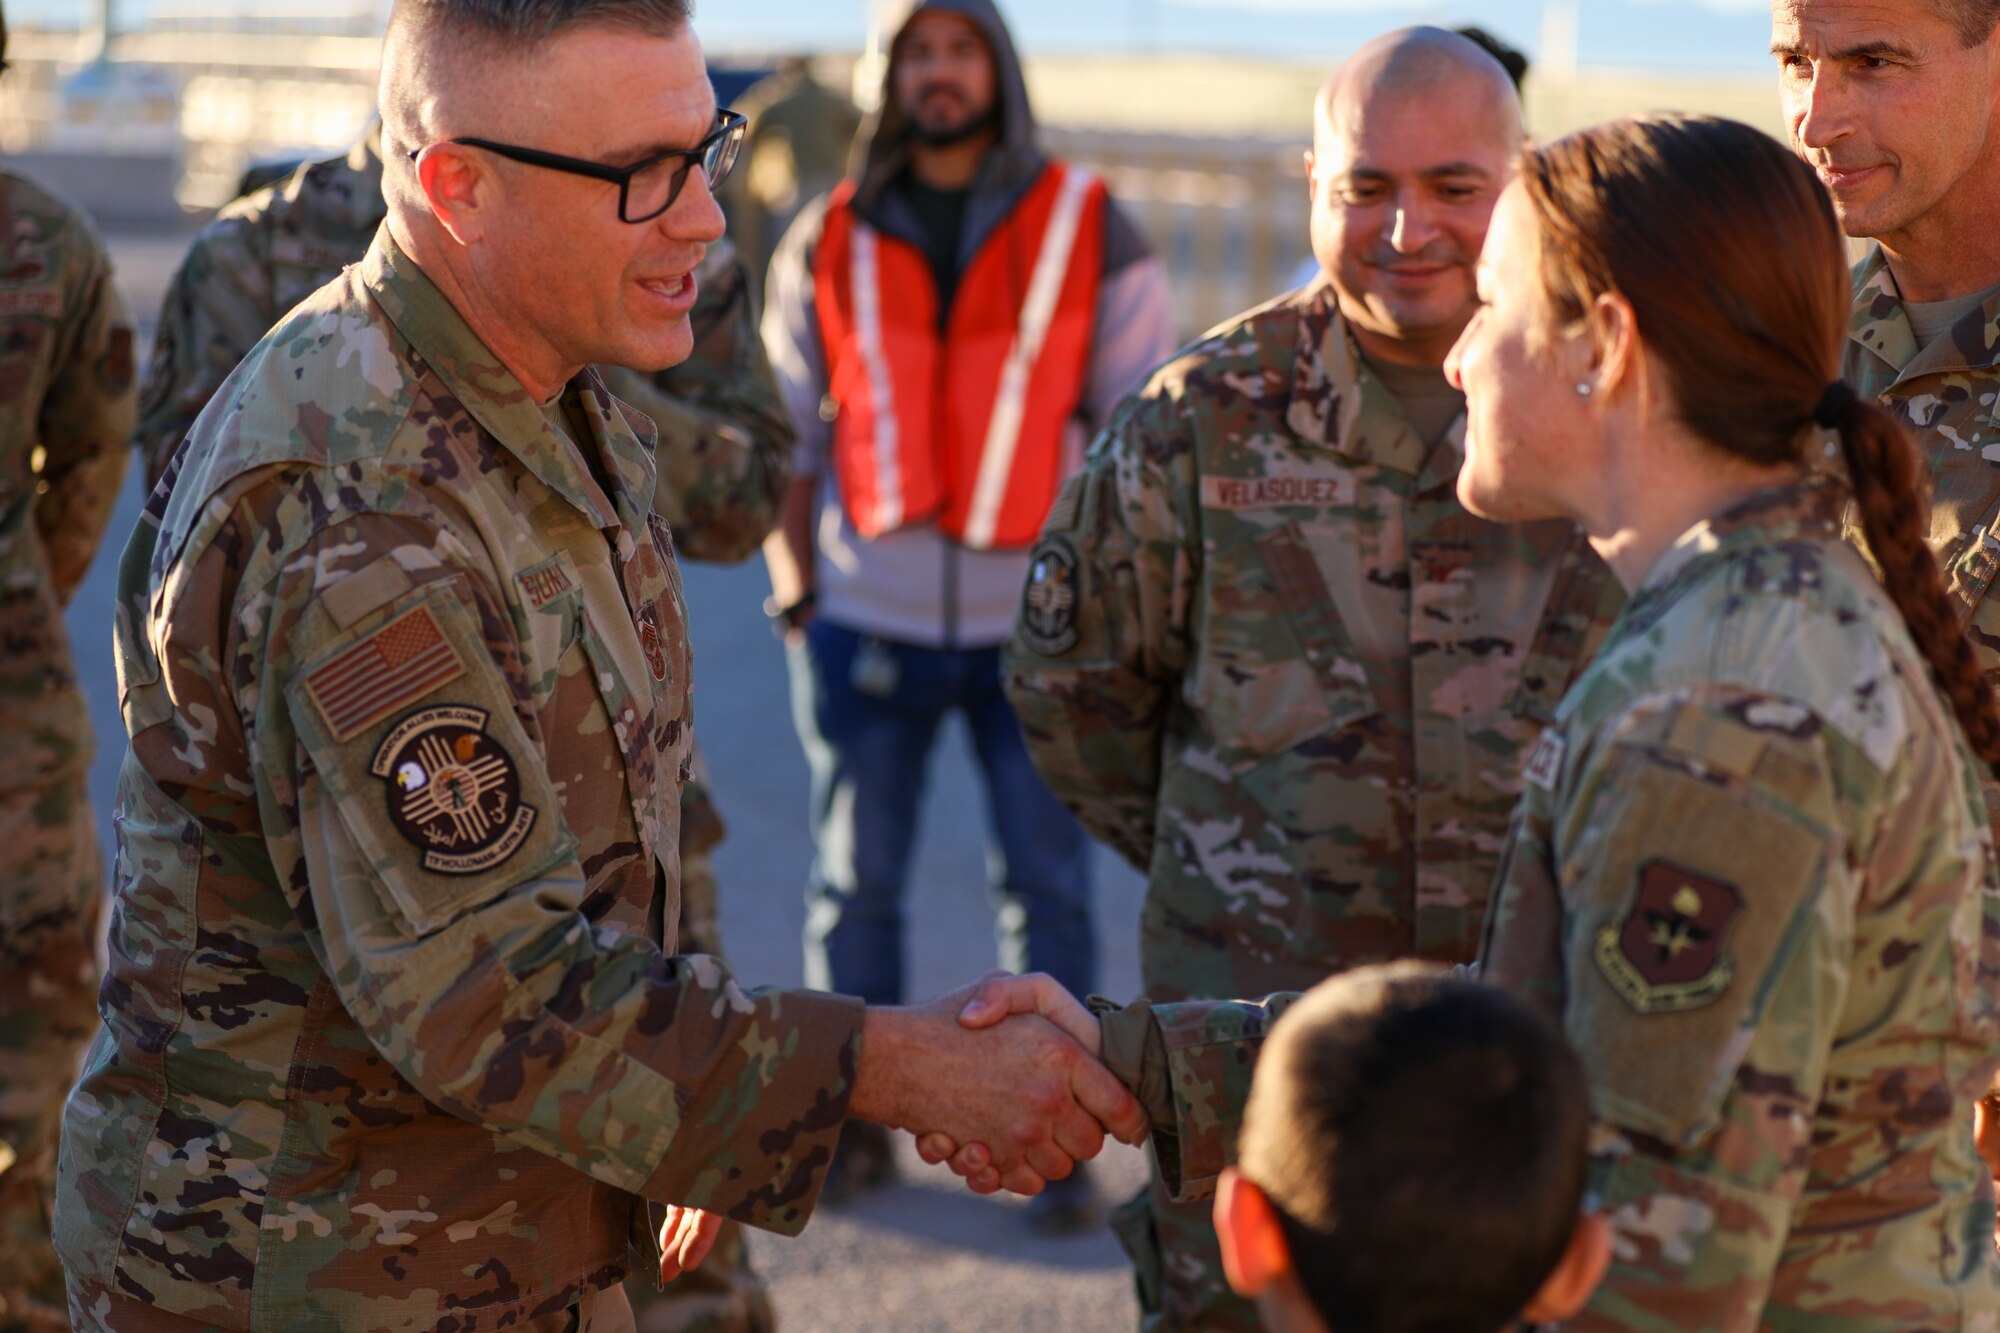 U.S. Air Force Chief Master Sgt. Mikael Sundin, Continental U.S. North American Aerospace Defense Command Region and 1st Air Force (Air Forces Northern) command chief, shakes hands with an Airman assigned to Task Force Hollman during his visit to Holloman Air Force Base, New Mexico, Jan. 4, 2022. The Department of Defense, through the U.S. Northern Command, and in support of the Department of State and Department of Homeland Security, is providing transportation, temporary housing, medical screening, and general support for at least 50,000 Afghan evacuees at suitable facilities, in permanent or temporary structures, as quickly as possible. This initiative provides Afghan evacuees essential support at secure locations outside Afghanistan. (U.S. Army photo by Sgt. Jose Escamilla)